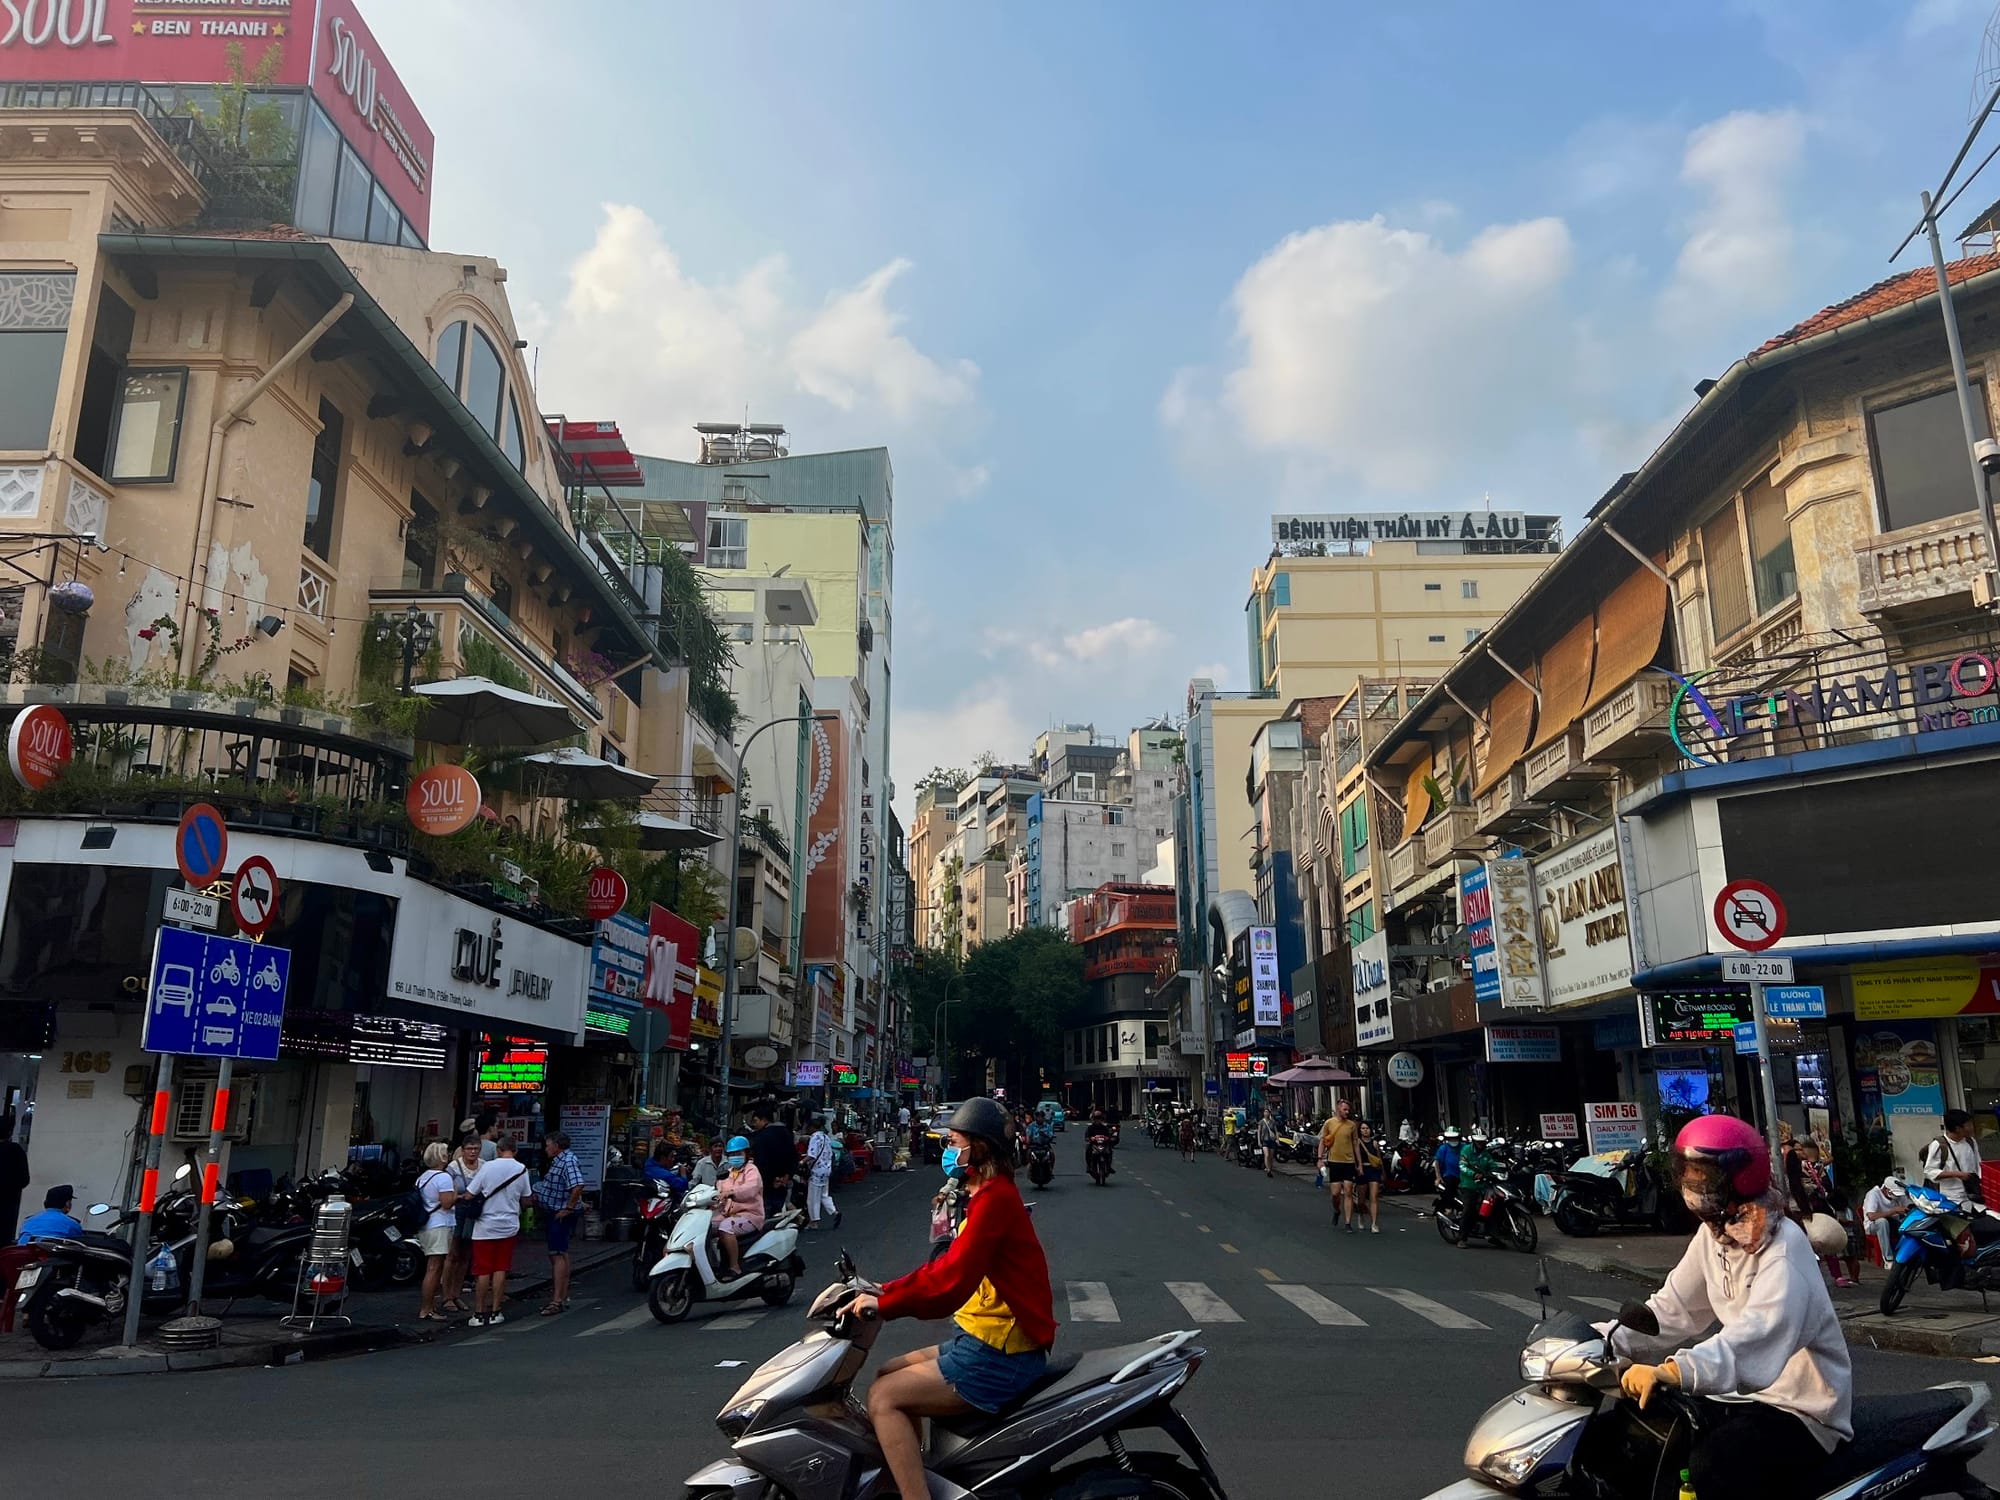 Busy streets of Ho Chi Minh City, people on motorbikes, shops, high buildings